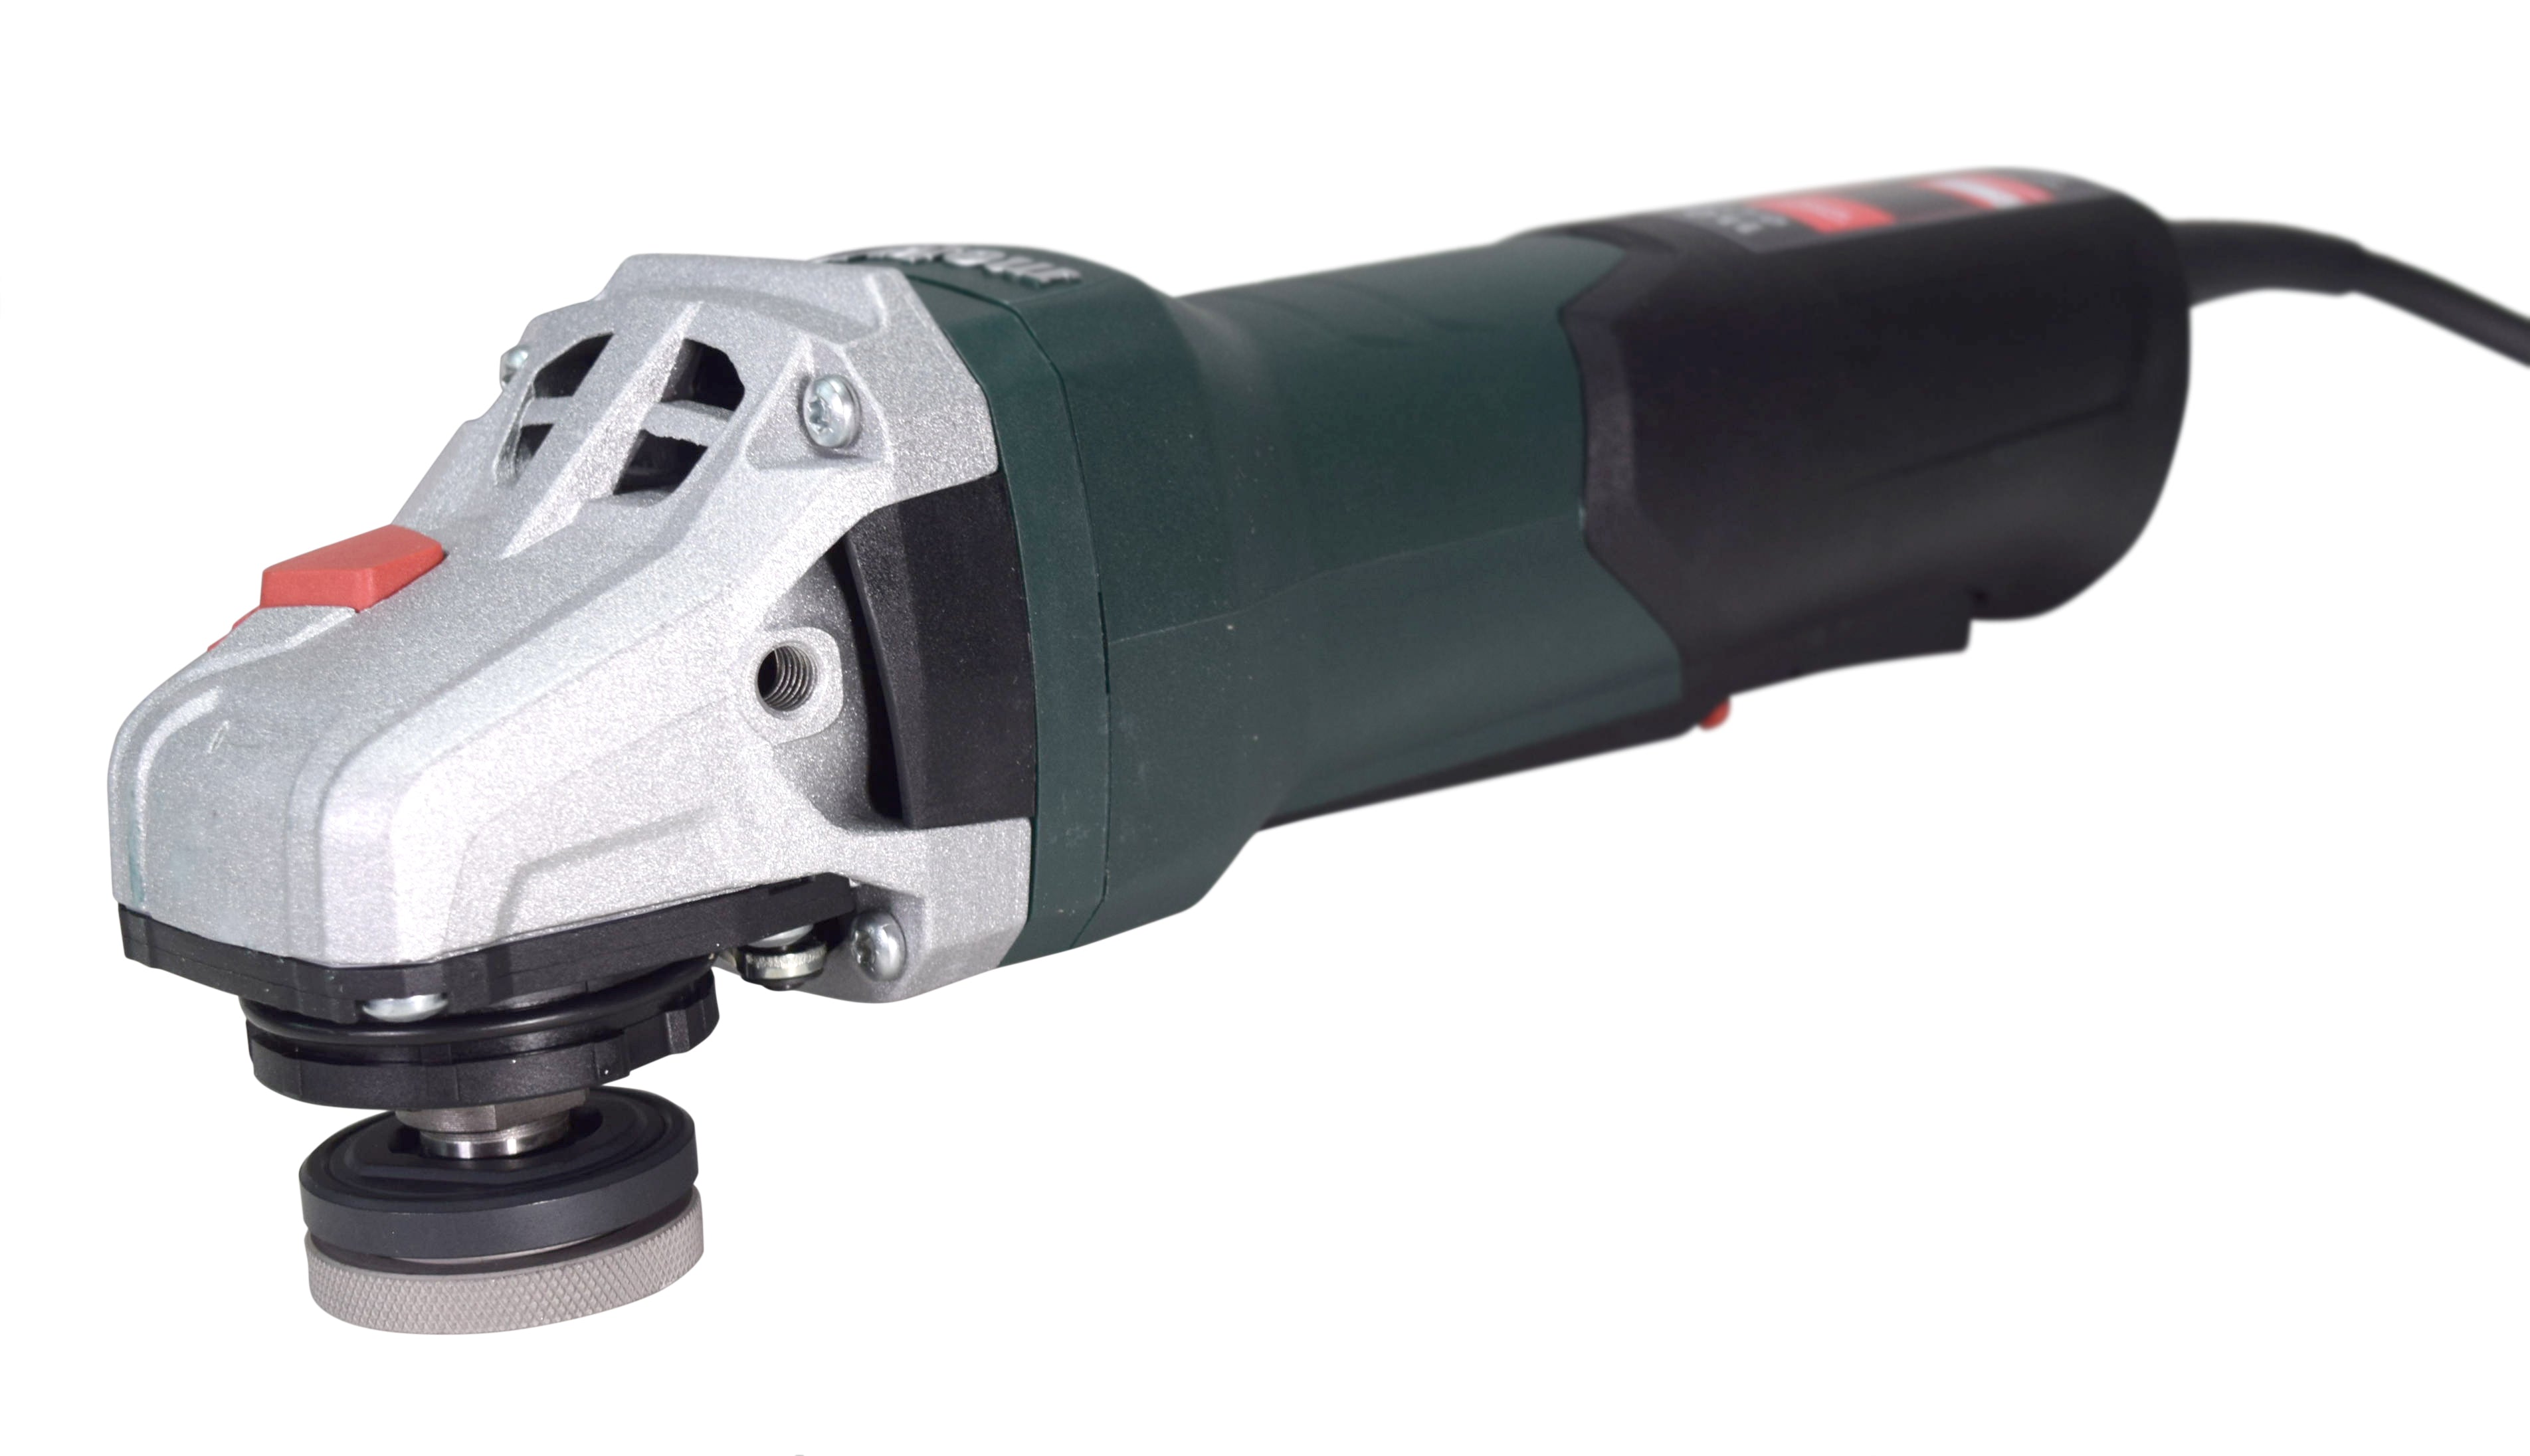 Metabo WP 11-125 Quick 4-1/2"- 5" Angle Grinder